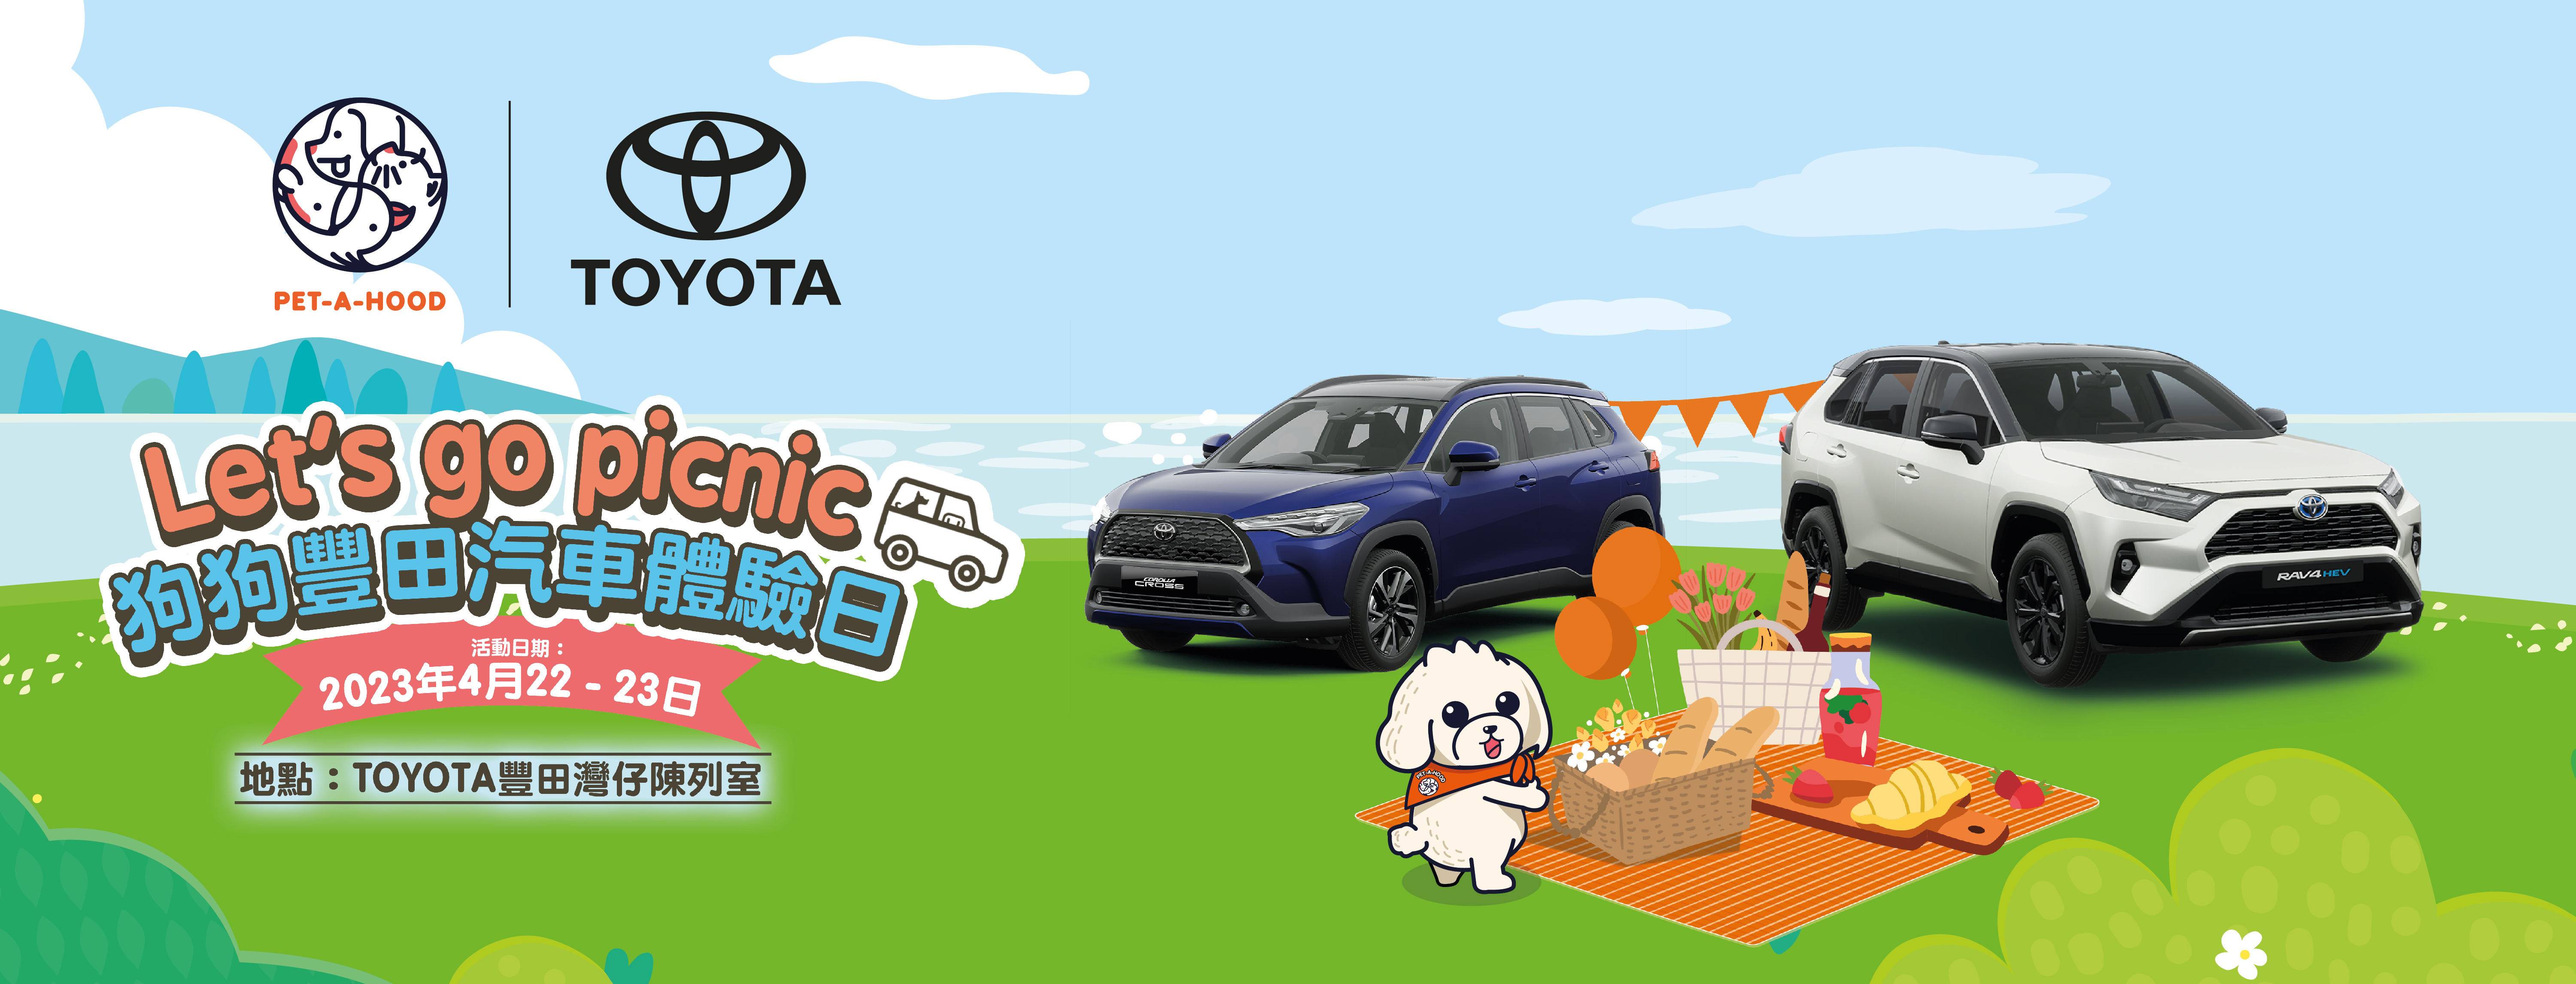 TOYOTA x PET-A-HOOD｜Let’s Go Picnic Car Experience Day 2023